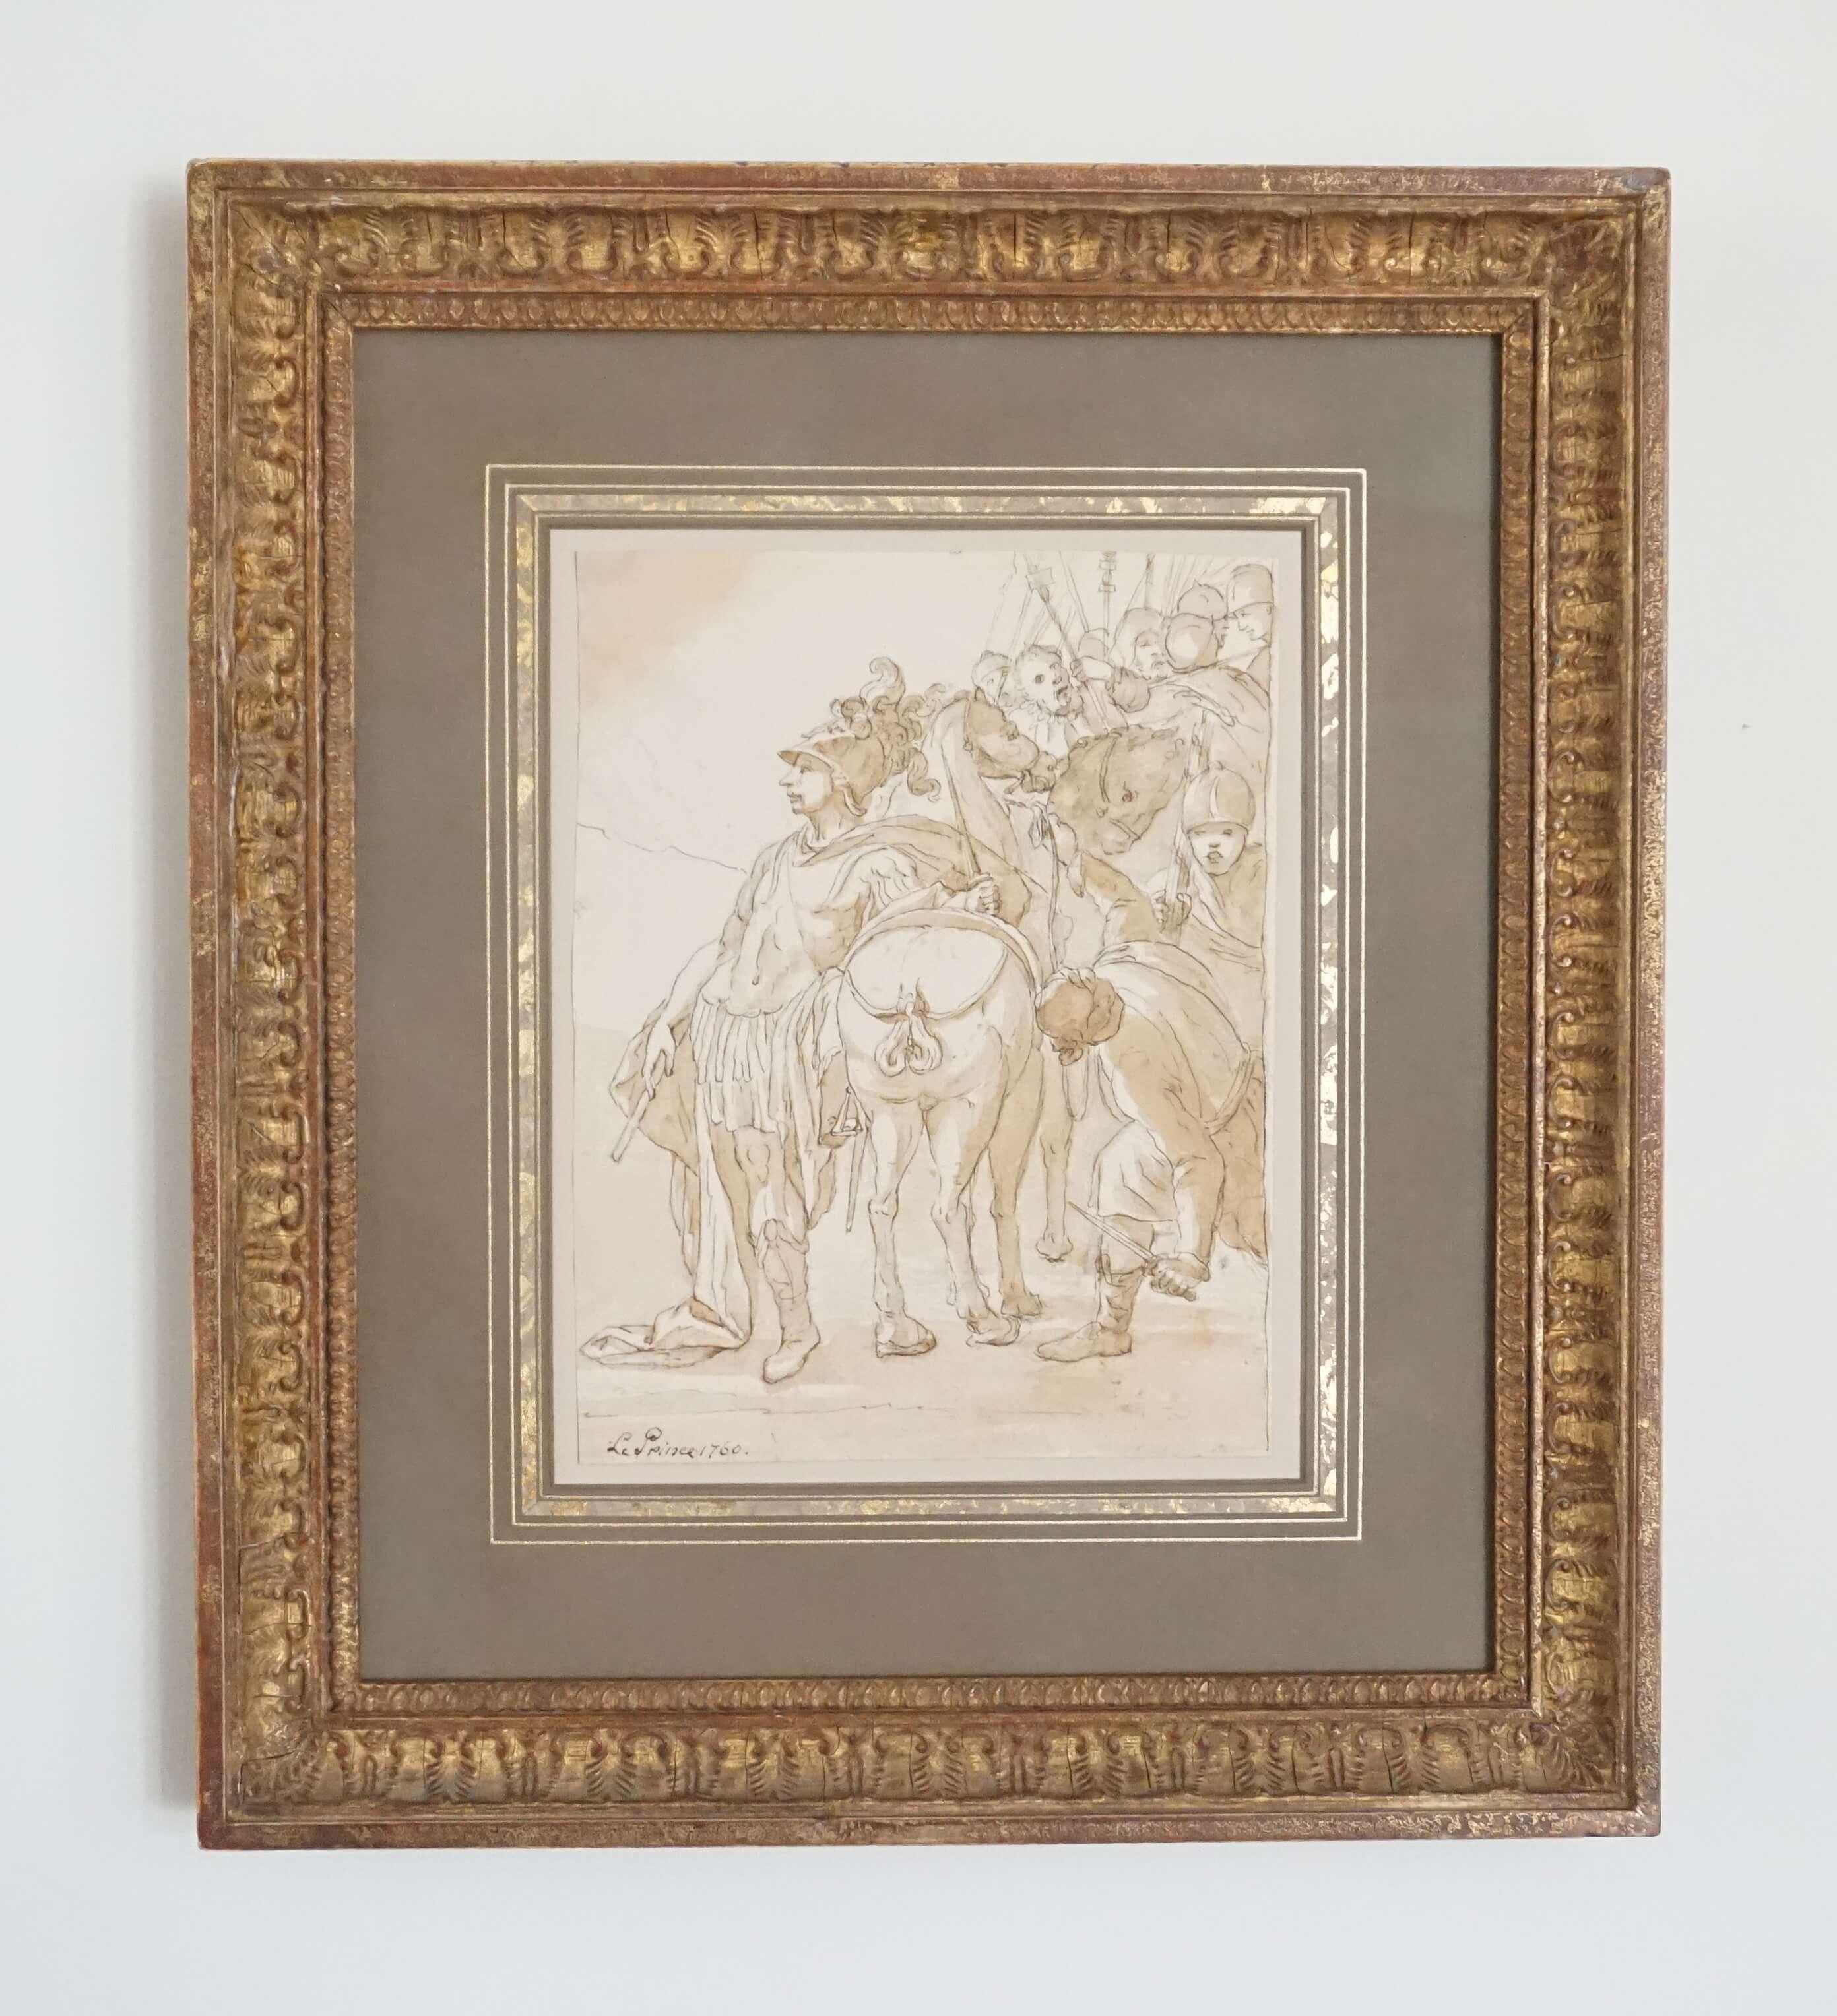 A black ink and sepia wash drawing by French artist Jean-Baptiste Le Prince of a classical scene of Roman soldiers with camel signed and dated lower left. This work is page cut from a sketch-book as it is double sided (reverse is a charcoal sketch